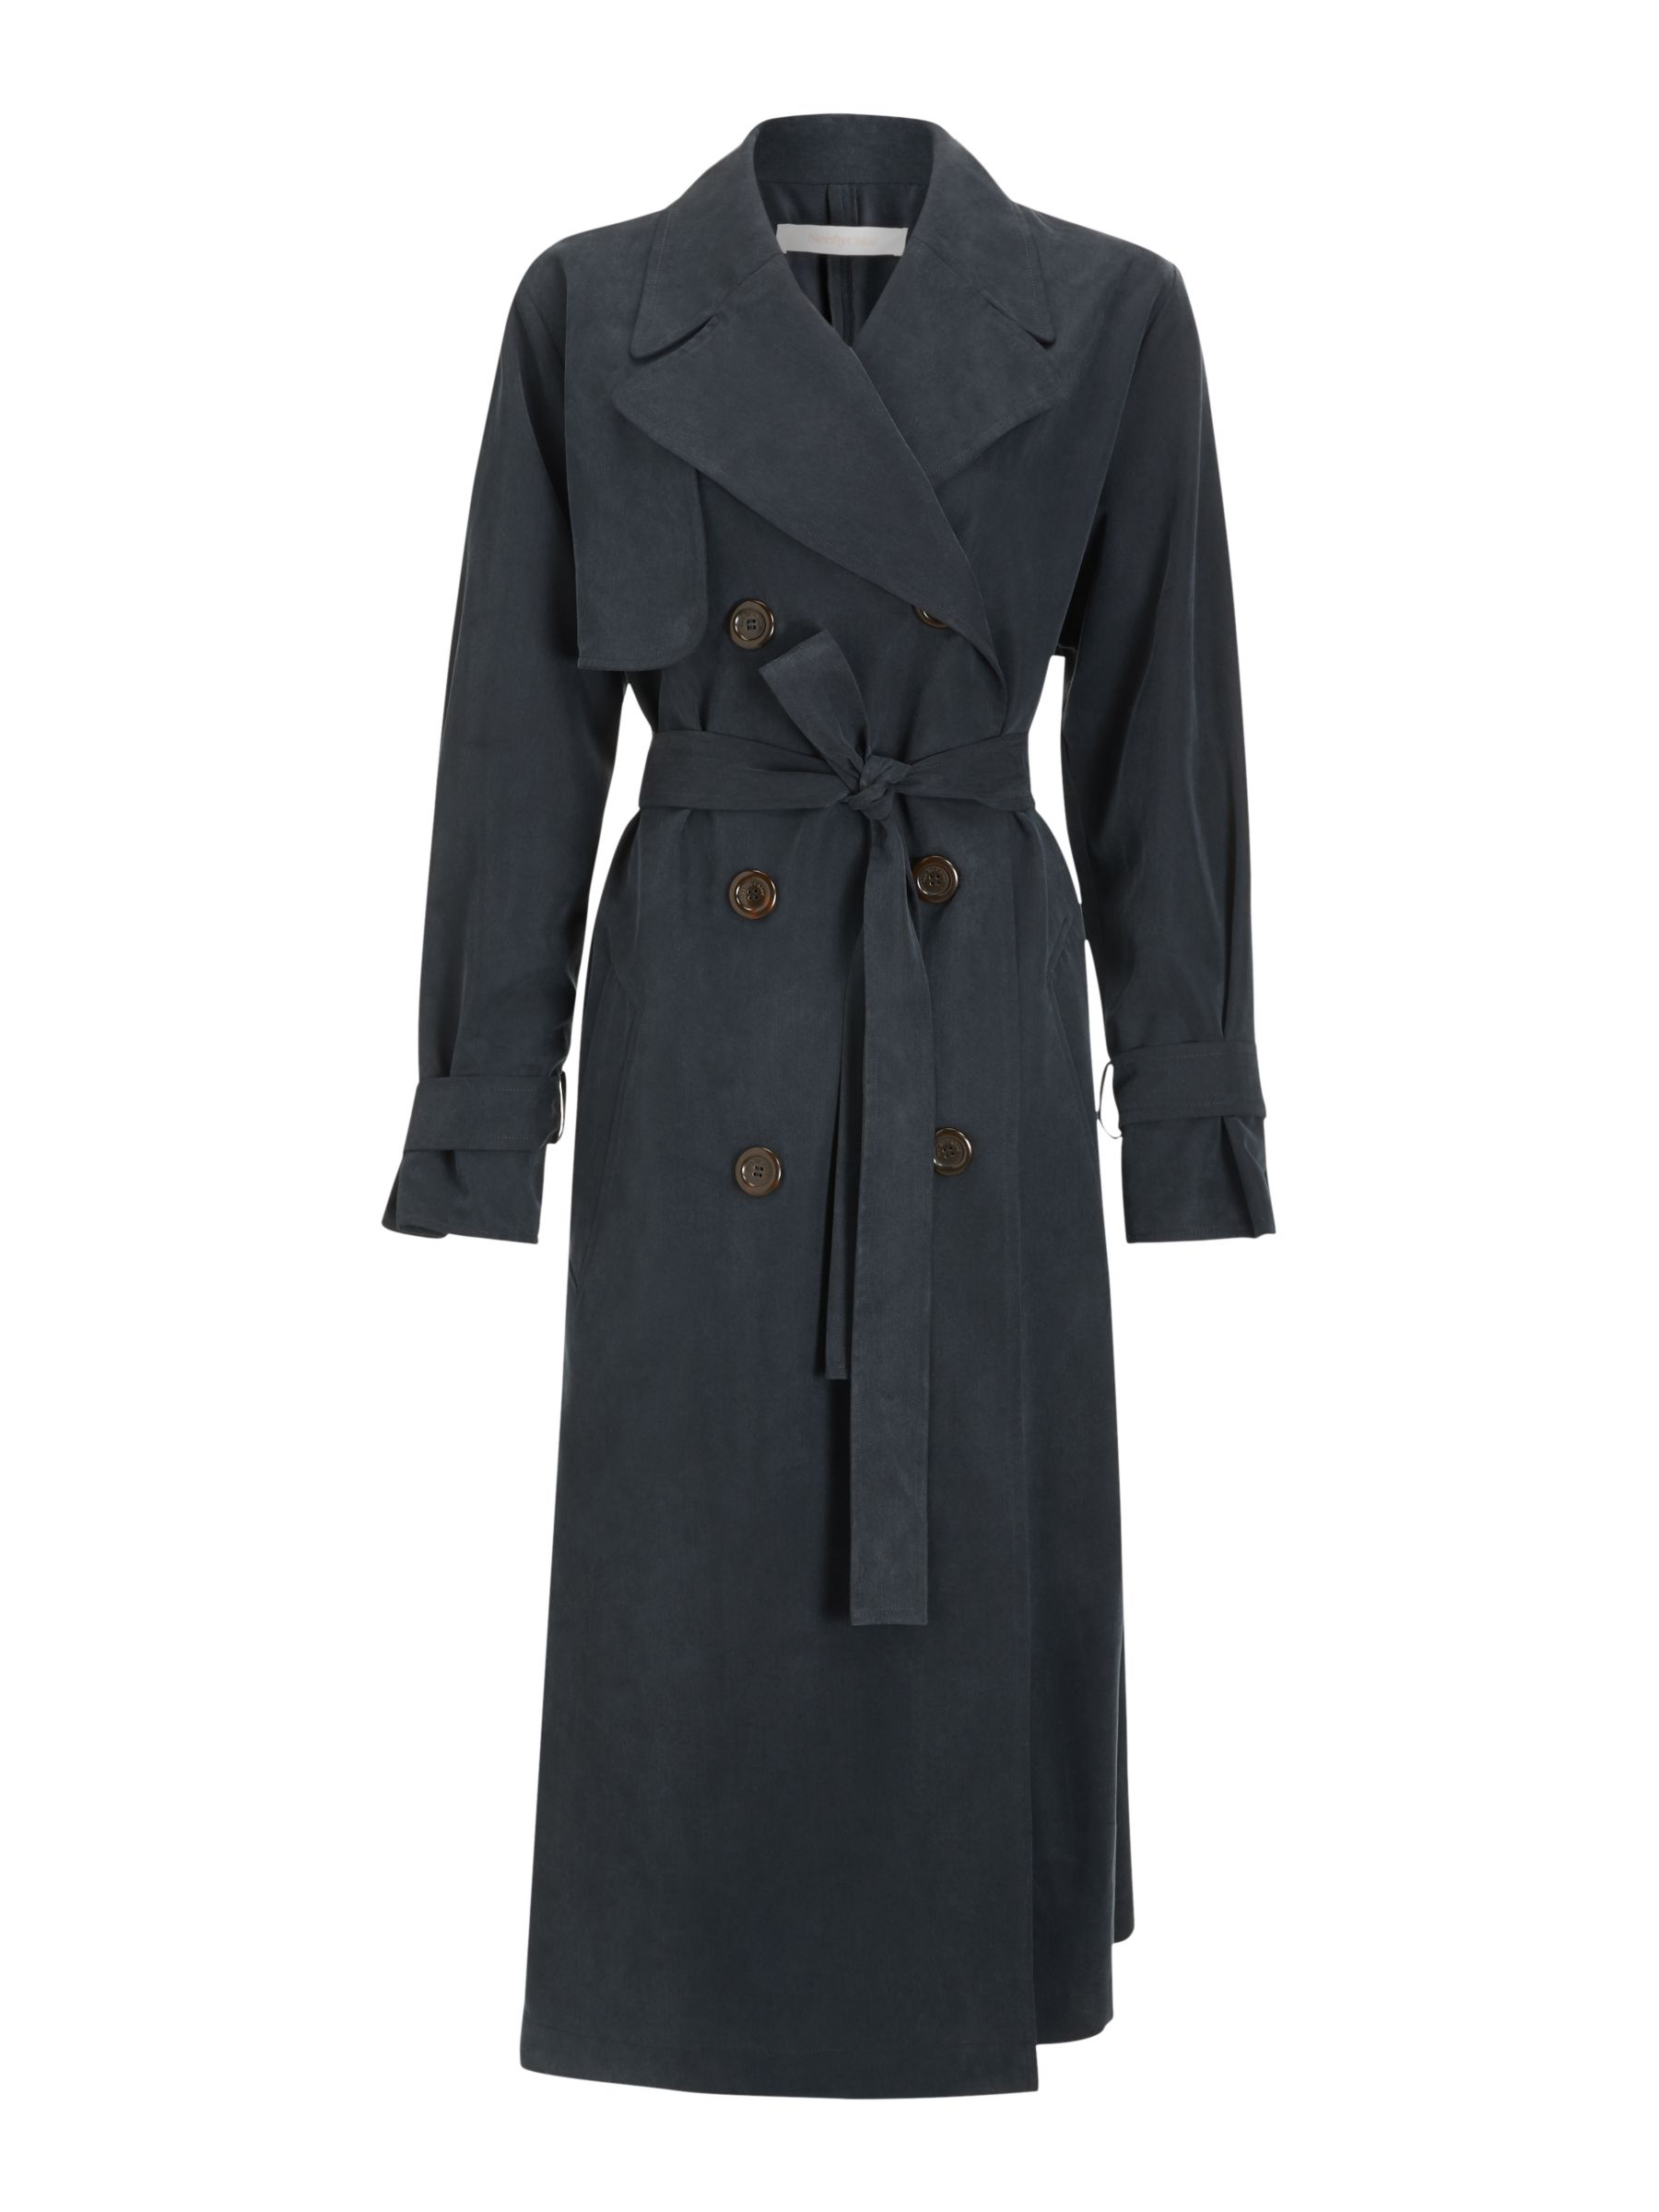 See By Chloé Denim Look Trench Coat, Ink Navy at John Lewis & Partners